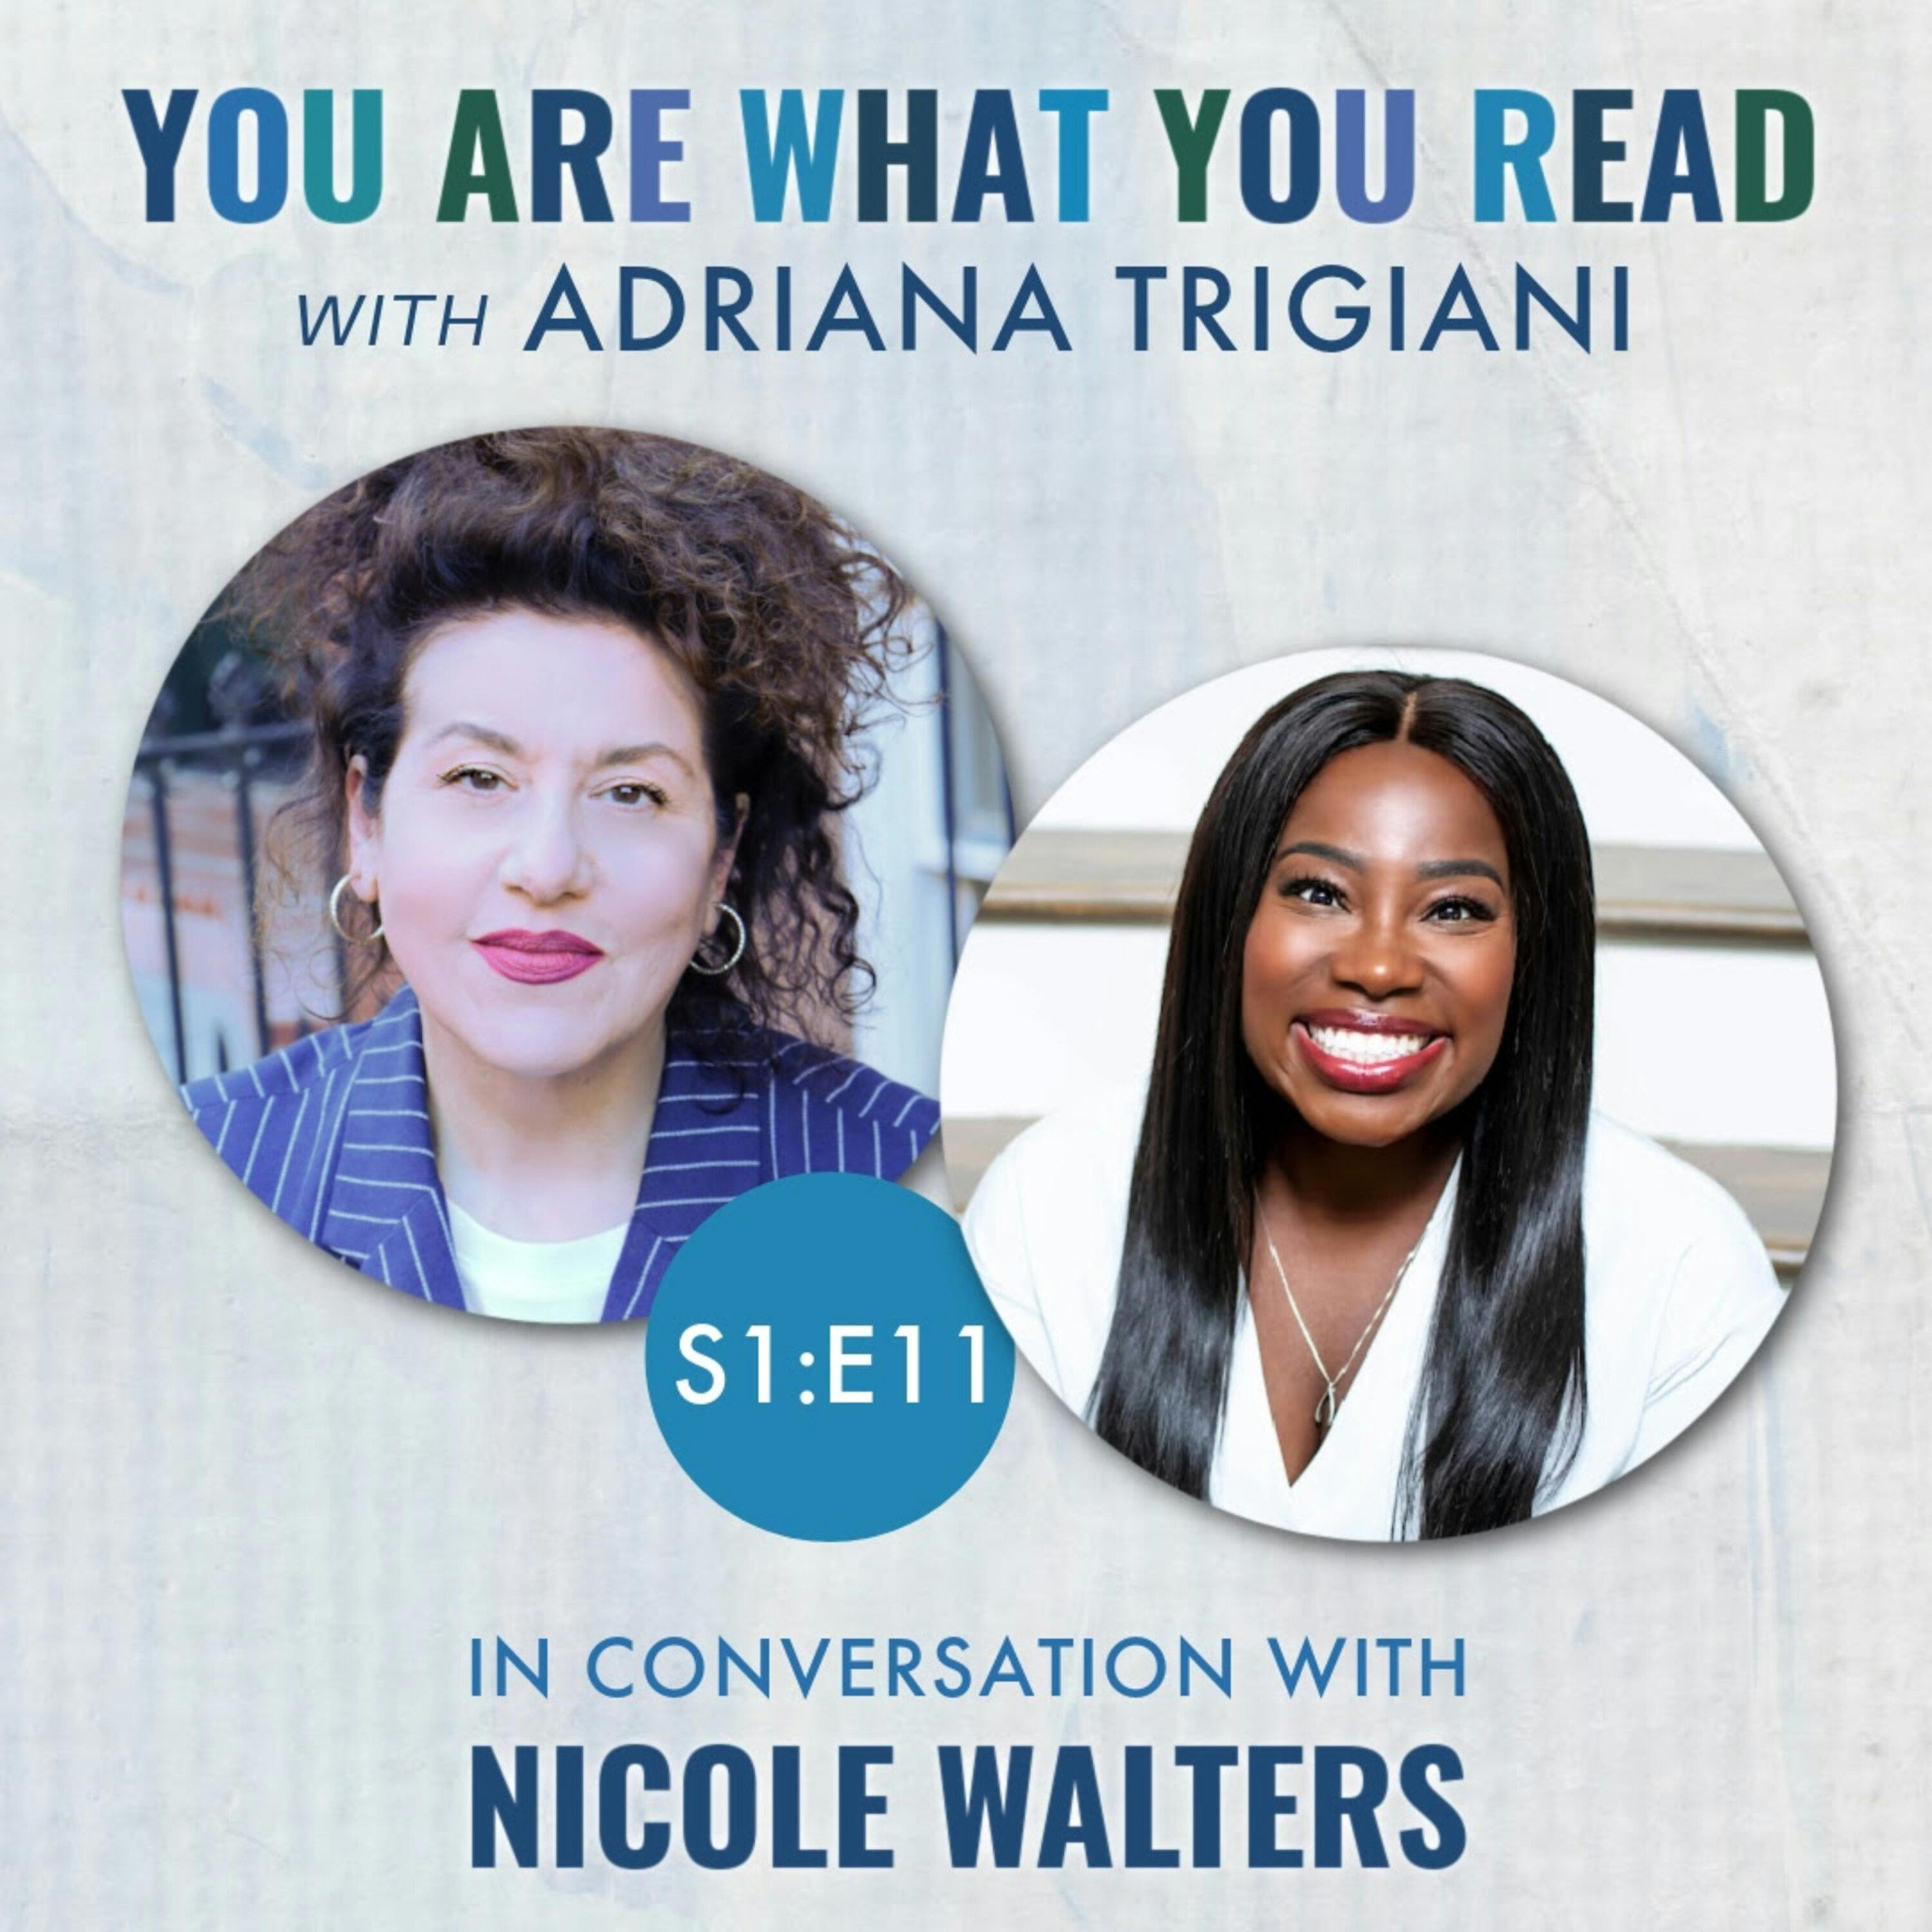 Nicole Walters: A guide to living boldly